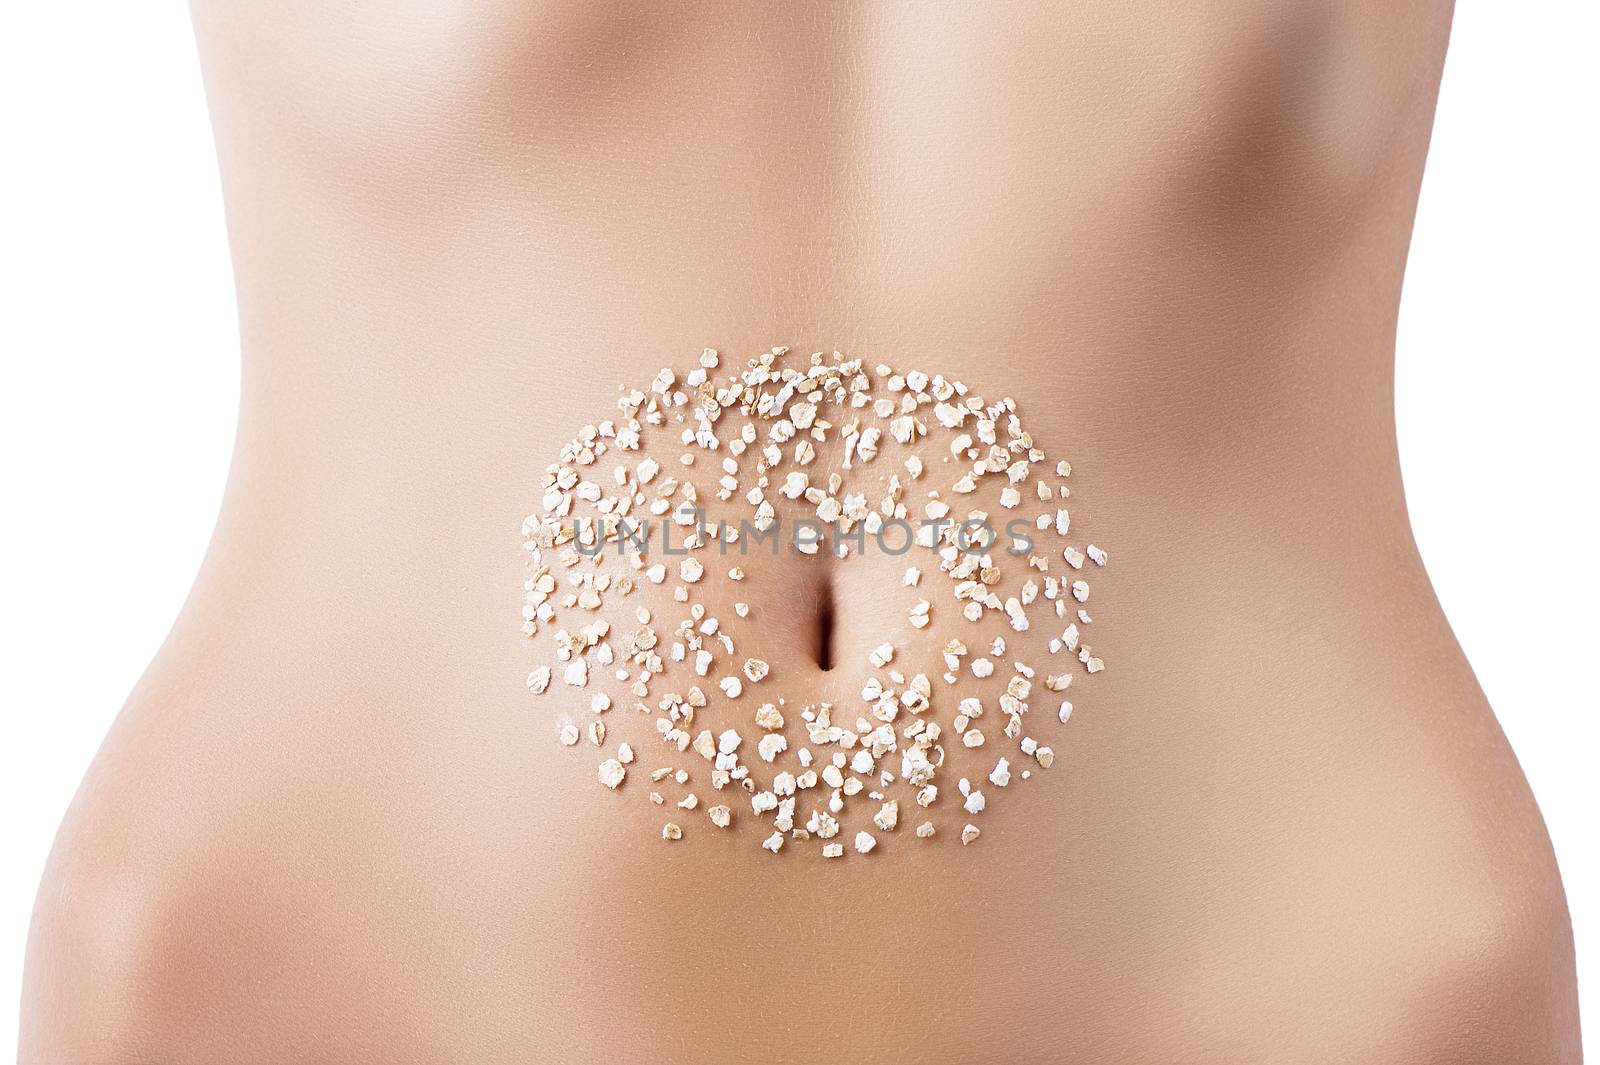 composition of oat flakes placed around the navel